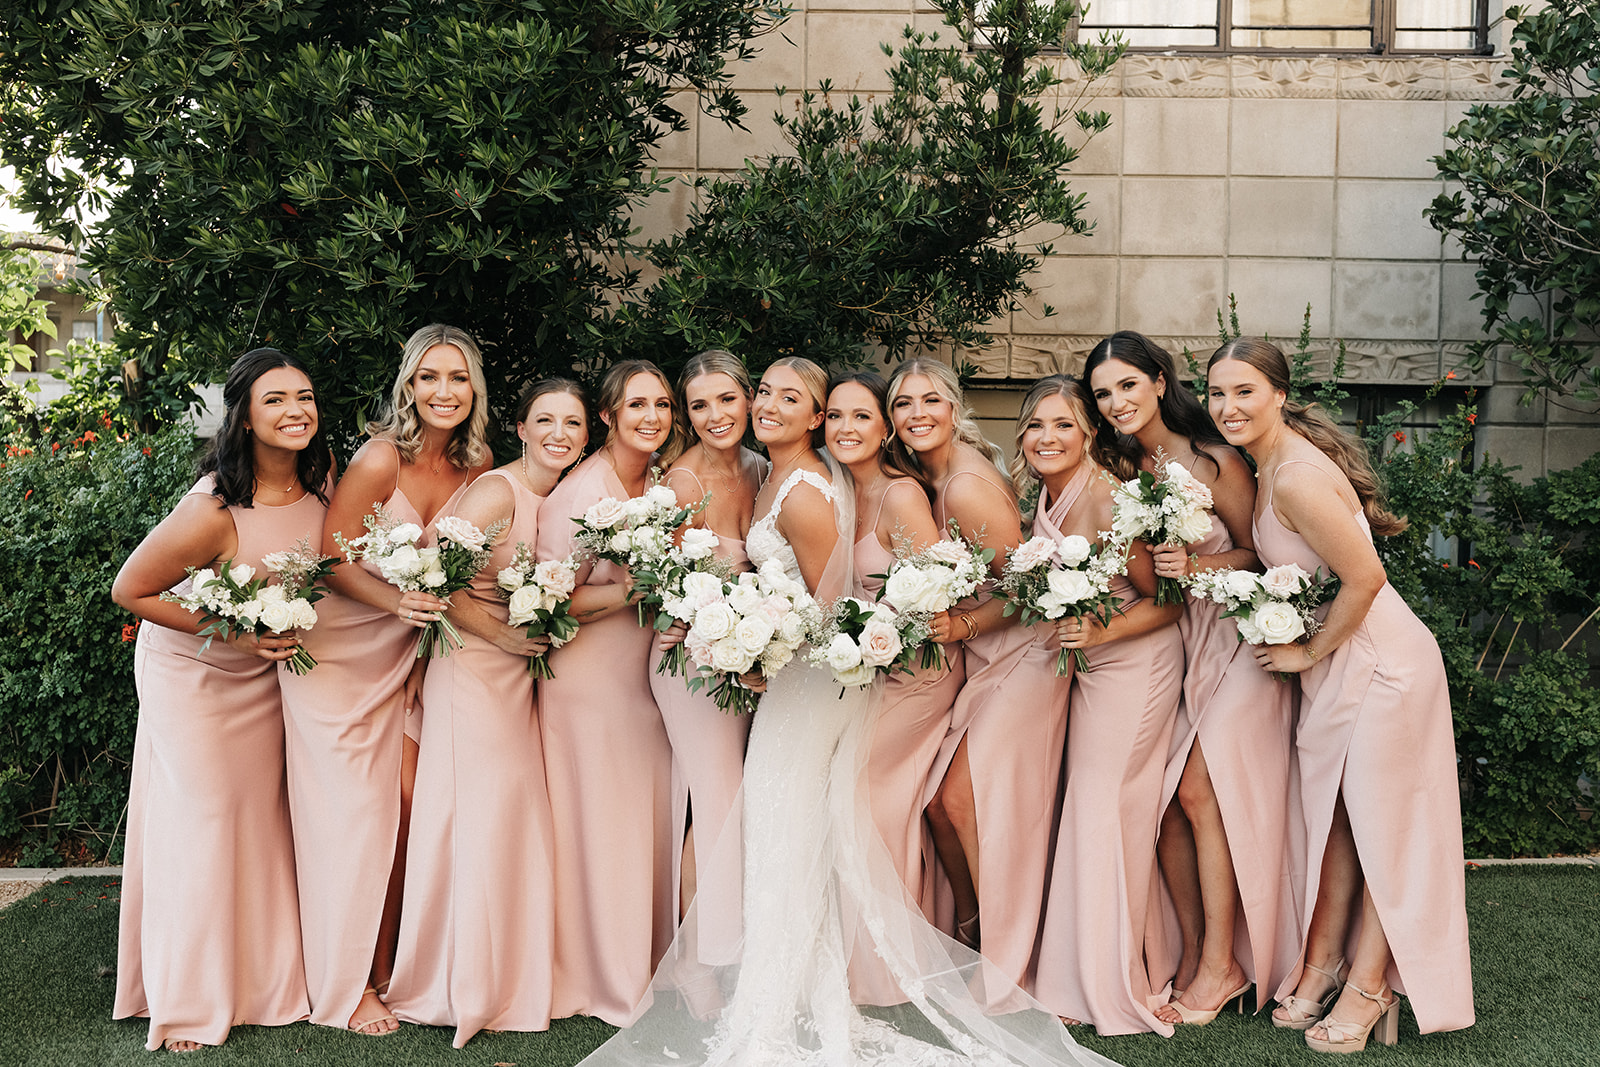 Bride in center of line of bridesmaids wearing blush gowns, all smiling, holding soft colors bouquet flowers.